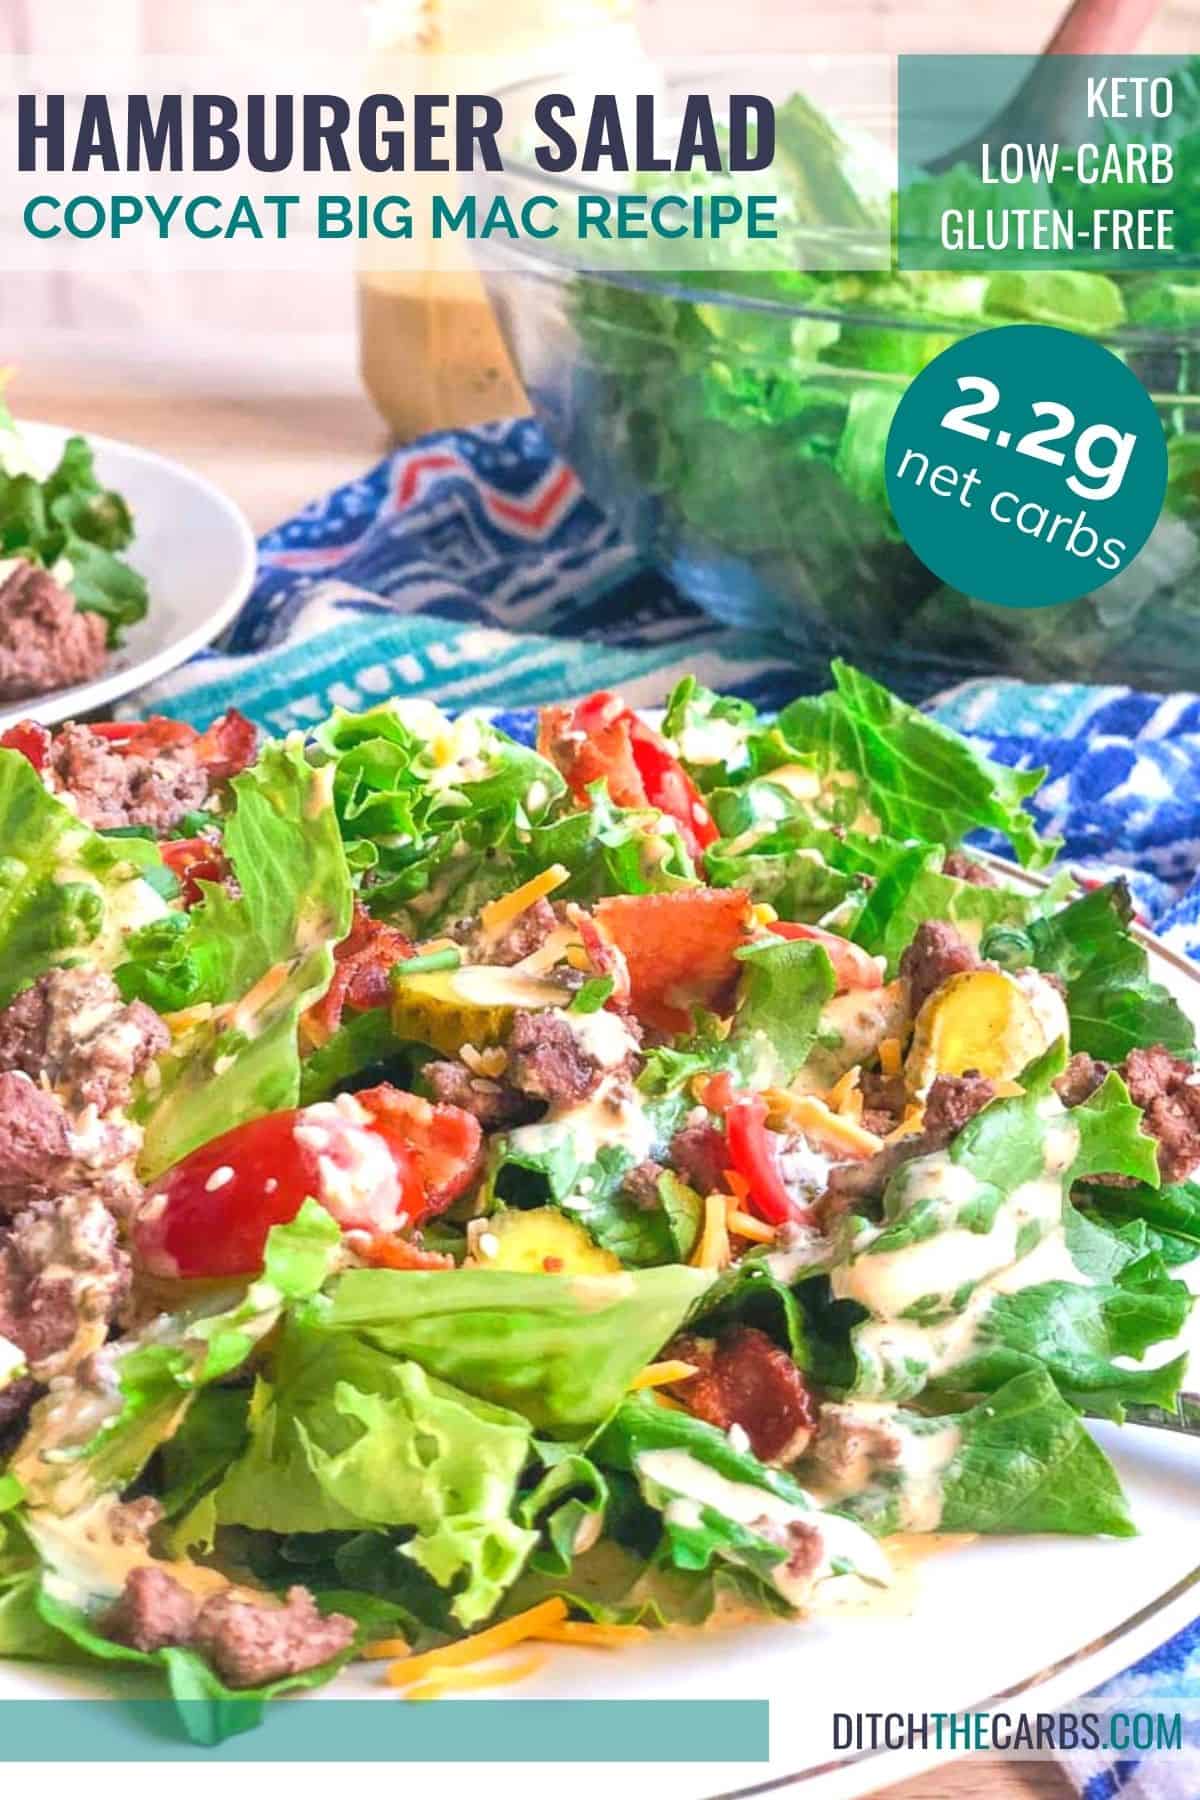 Close up picture of keto hamburger  salad showing halt the plate. Another plate and a bowl of lettuce is in the background.